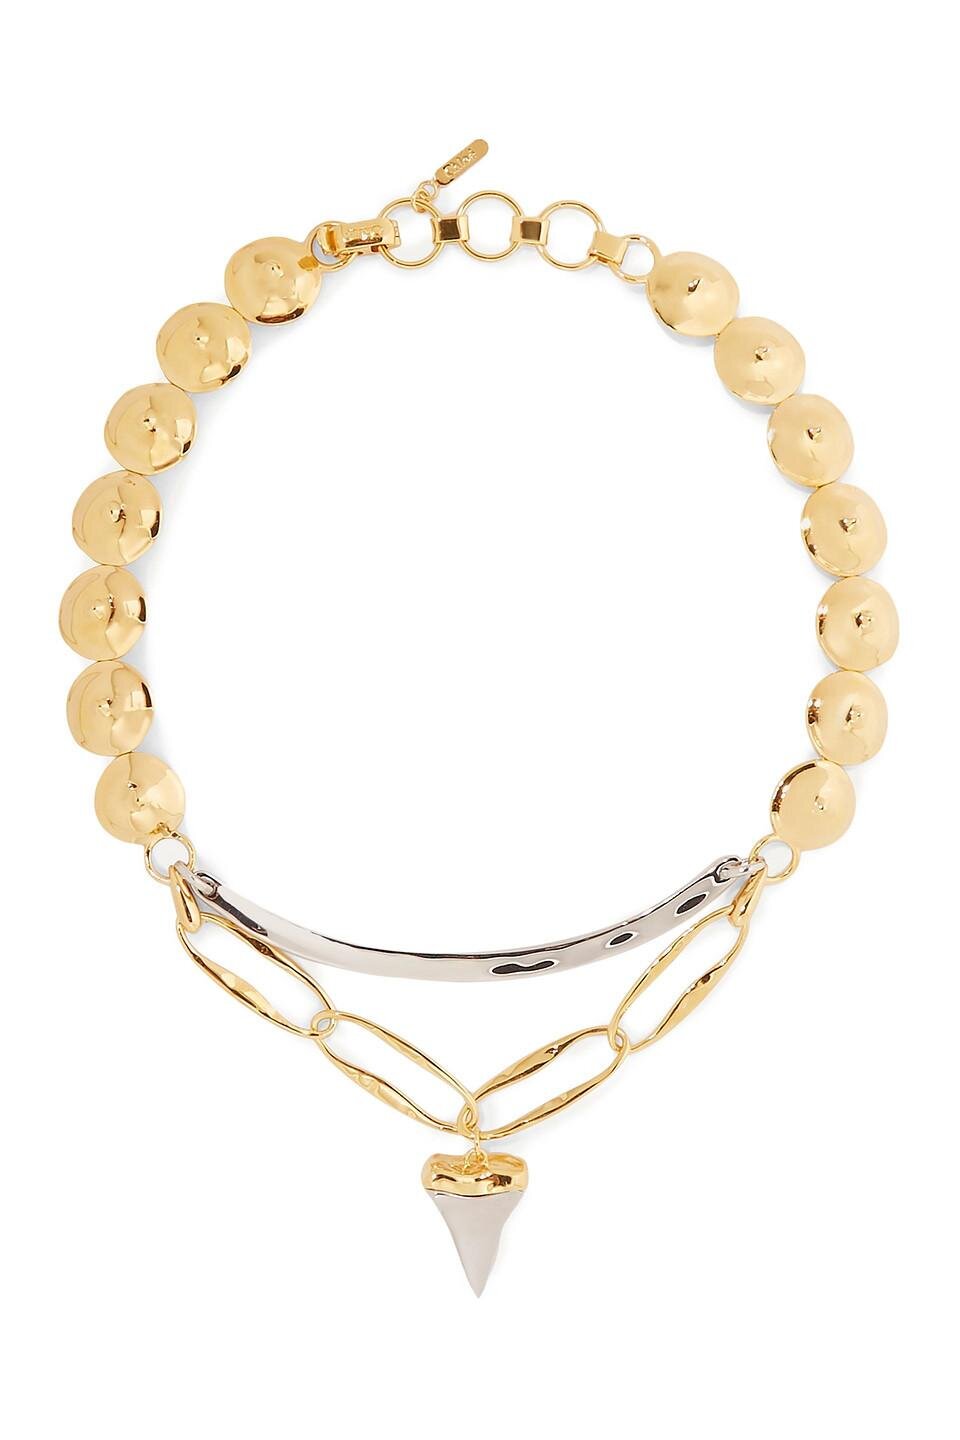 Chloe Bonnie Chain Link Necklace with Tooth Charm.jpg